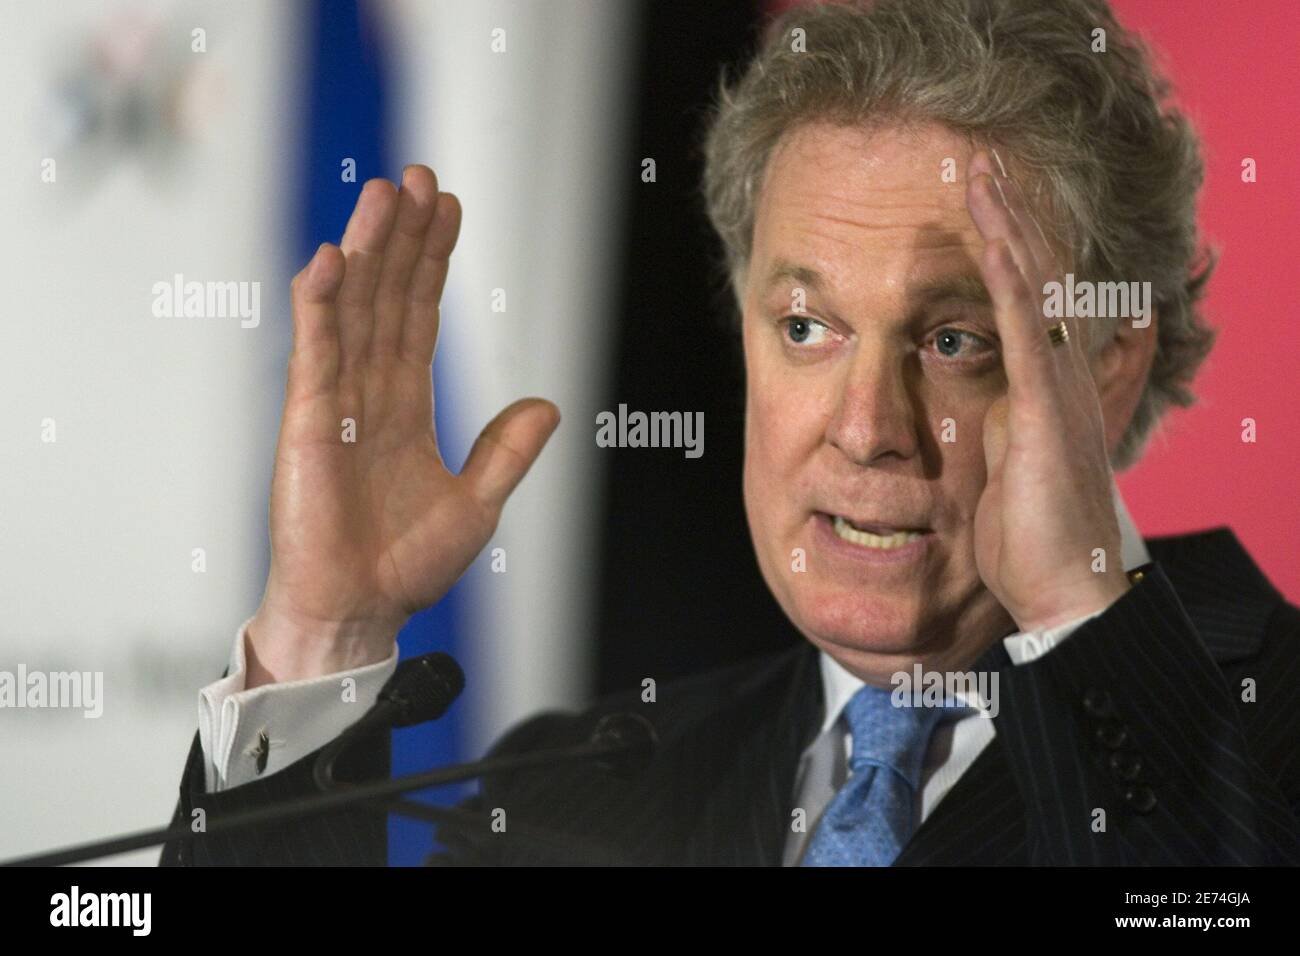 Quebec Premier and leader of the Liberal Party, Jean Charest, addresses members of the Montreal Chamber of Commerce in Montreal, Canada on March 20, 2007. Quebec voters will decide 26 March on either a federalist government or Quebec separatists trying to break up Canada. Photo by Normand Blouin/ABACAUSA.COM Stock Photo